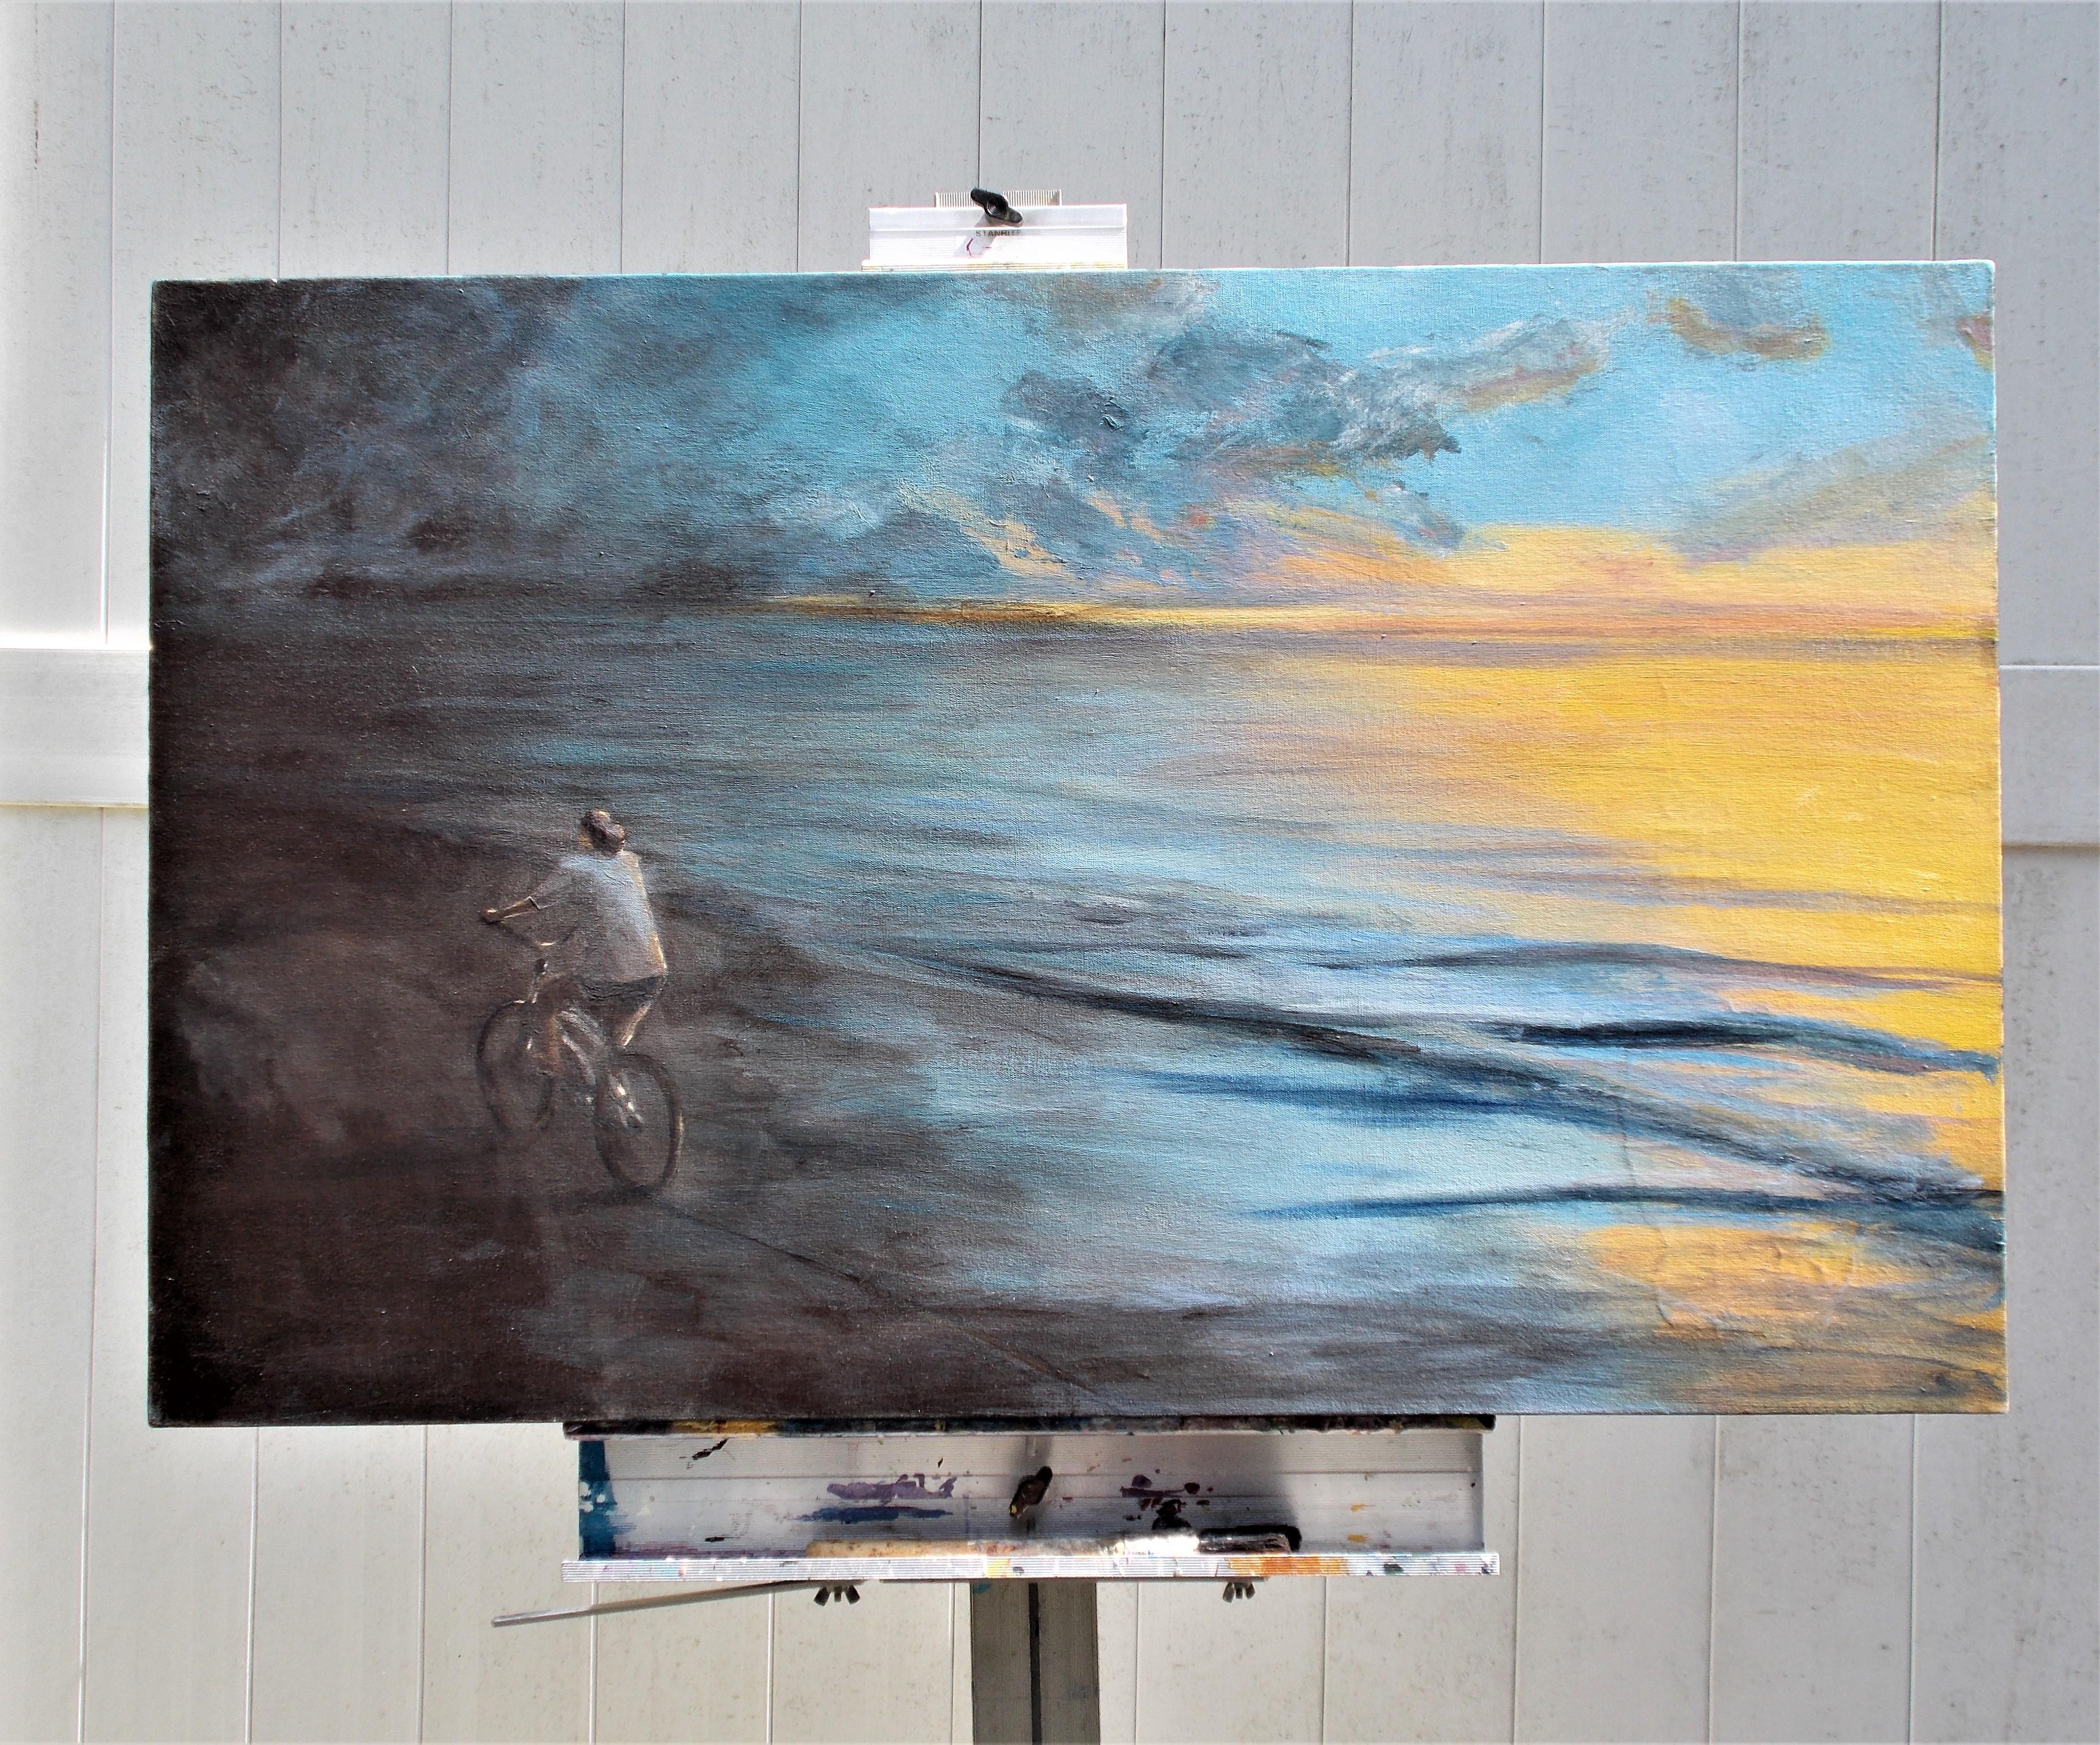 <p>Artist Comments<br>The last rays of sunset illuminate the ocean in artist Benjamin Thomas's seascape. The tides transition from a cool refreshing cerulean to warm glowing amber. A lone biker rides along the damp coastline leaving tracks on the